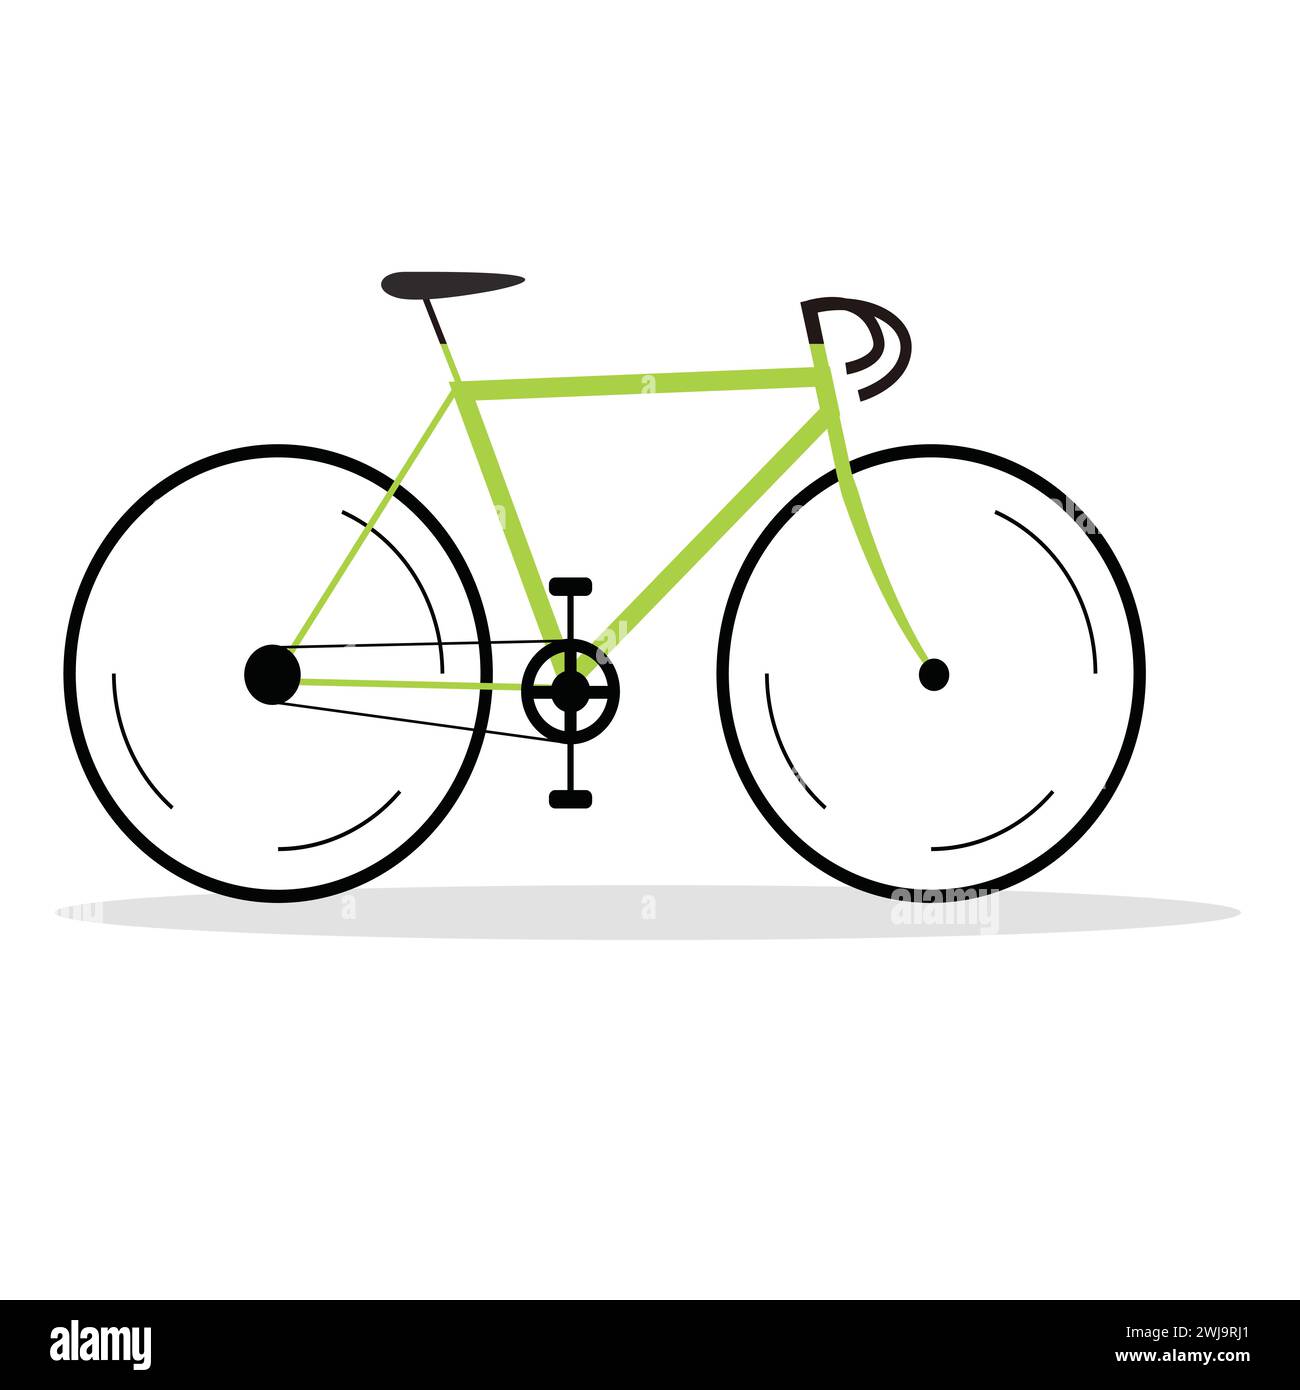 Flat vector illustration of side view of mountain or jump bicycle used by sportsperson. Stock Vector